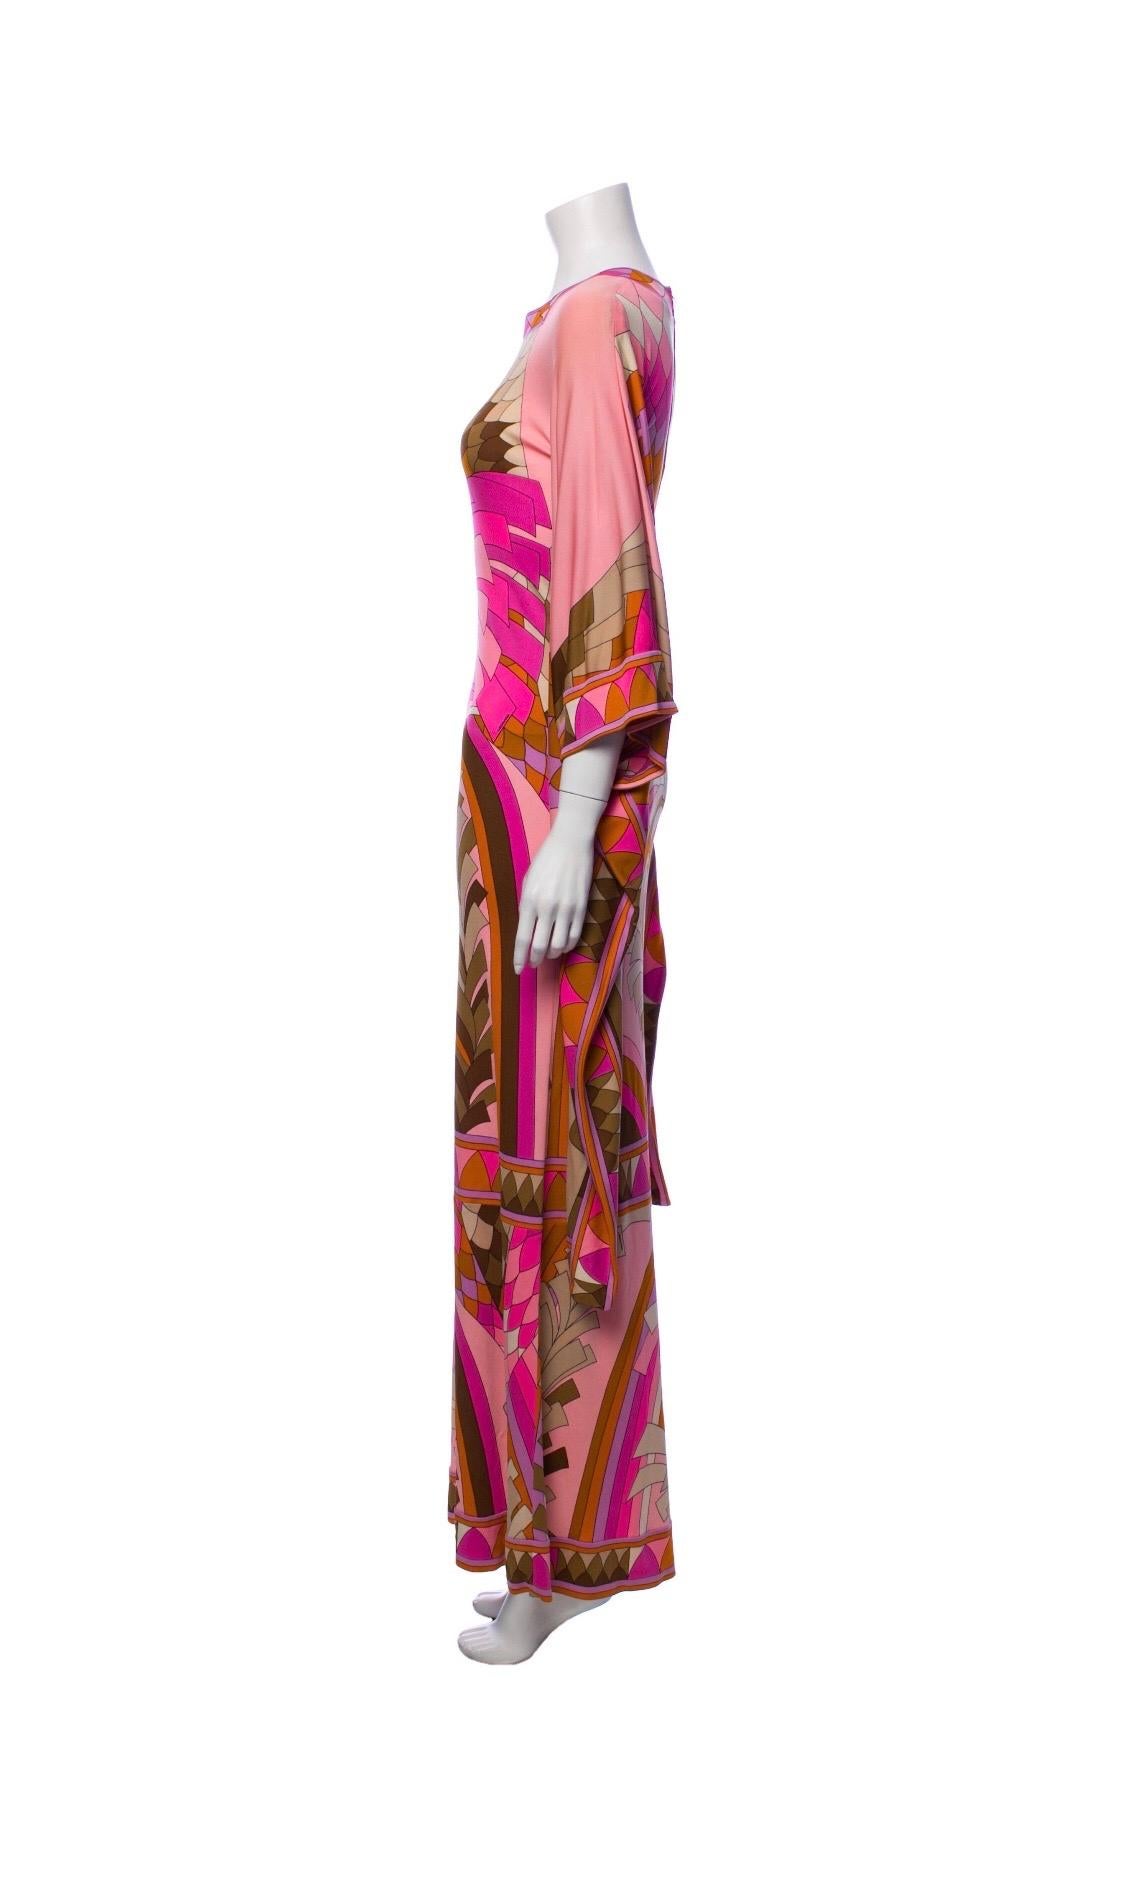 A beautiful 1970s Leonard Paris dress with some Pucci inspiration! Made from soft Silk Jersey, this maxi dress features a multi-colored geometric print with beautiful angel wing sleeves. Perfect for a day or night out, this dress will pair perfectly